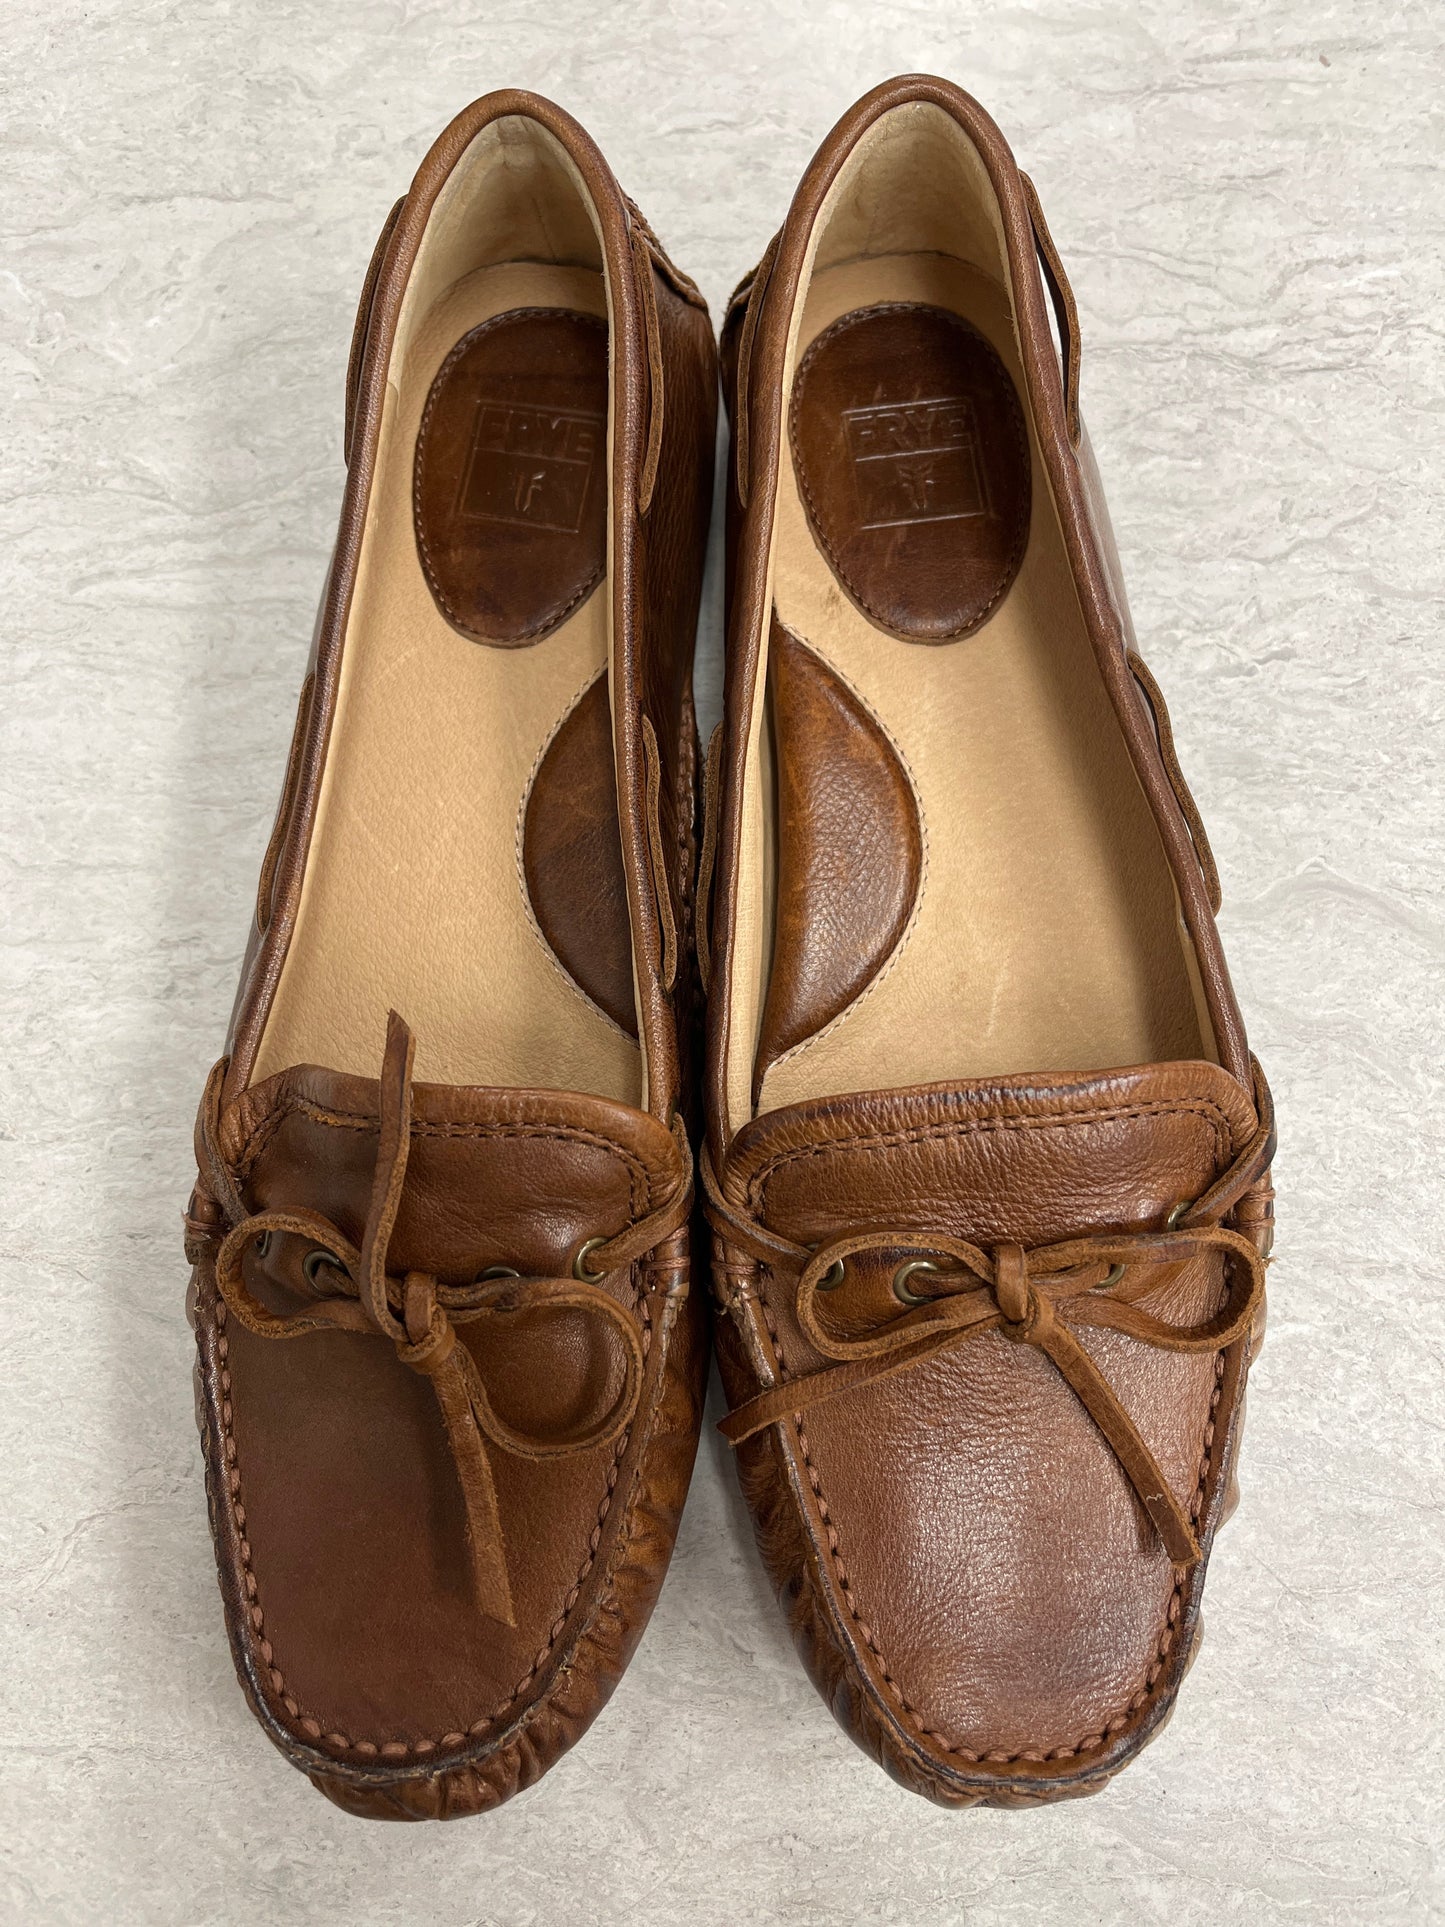 Brown Shoes Flats Frye, Size 9.5